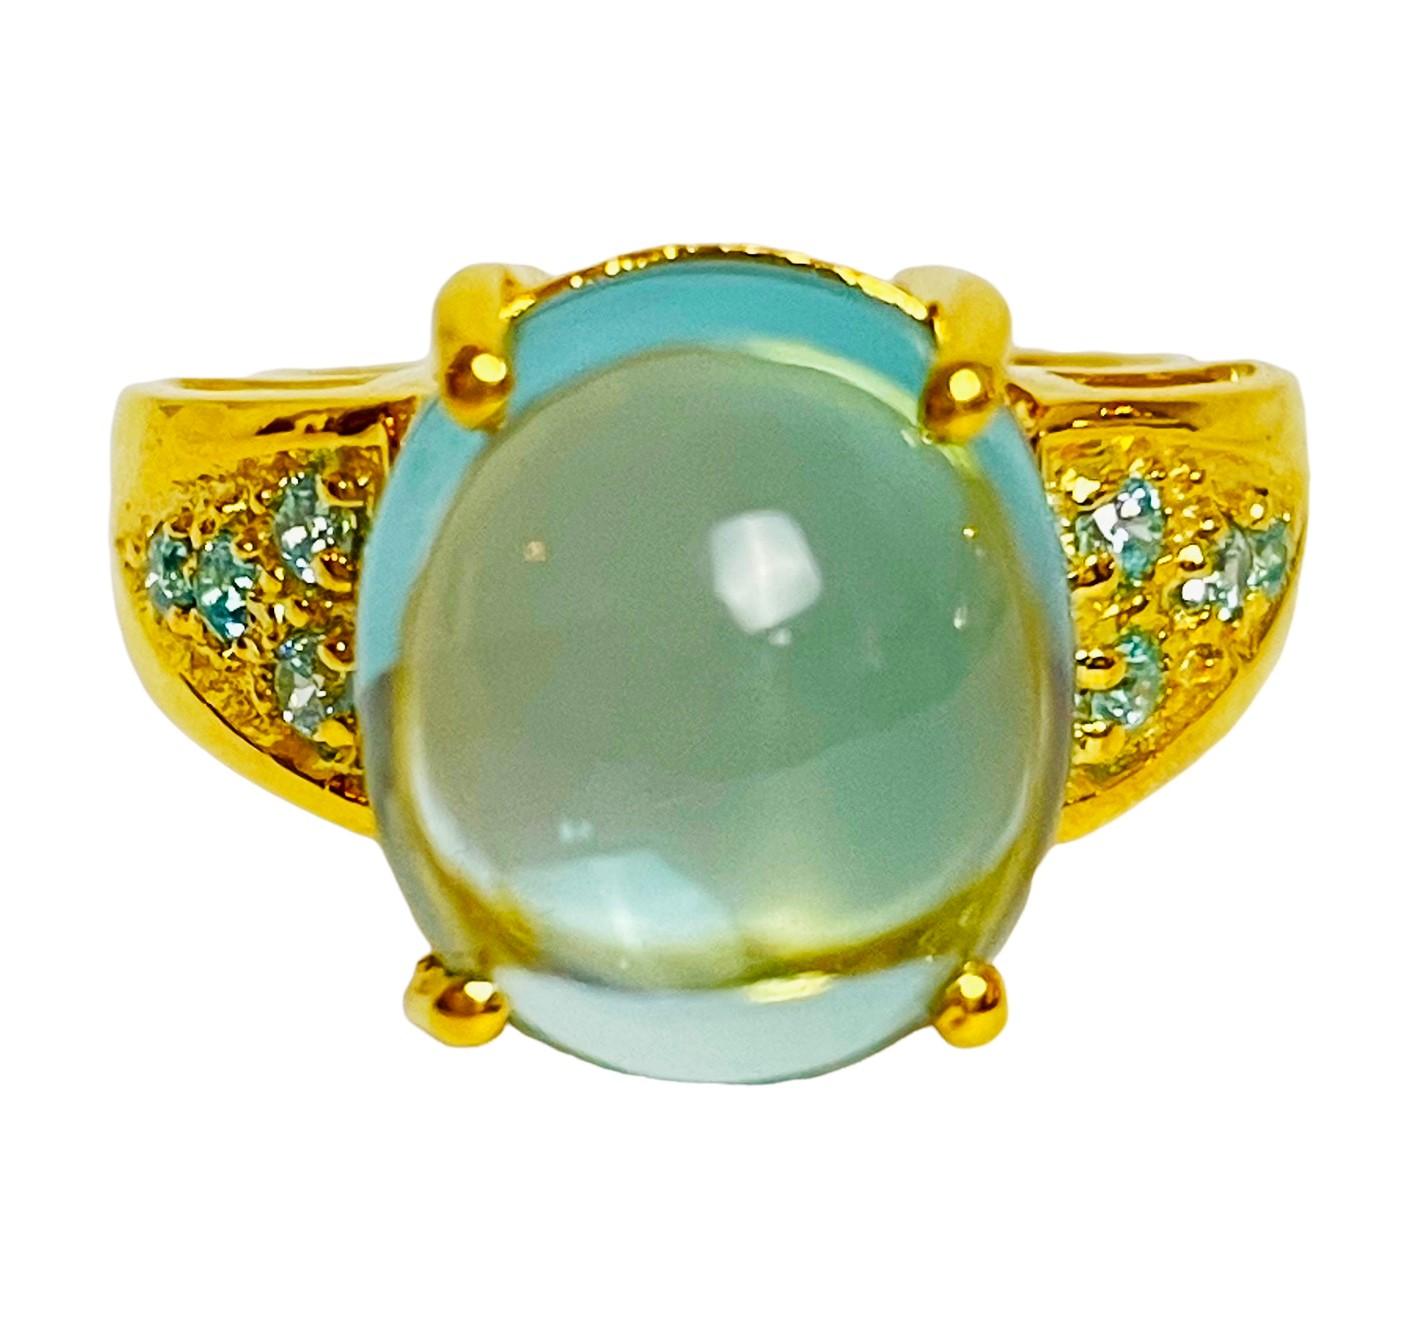 The stone in this ring is just stunning!  It is 7.80 carats.  It is 13 x 11 mm.  The color is amazing!  It's complemented by smaller aquamarine cut stones on the band.  If blue is a calming color, well, this is the ring for you.  It's like staring